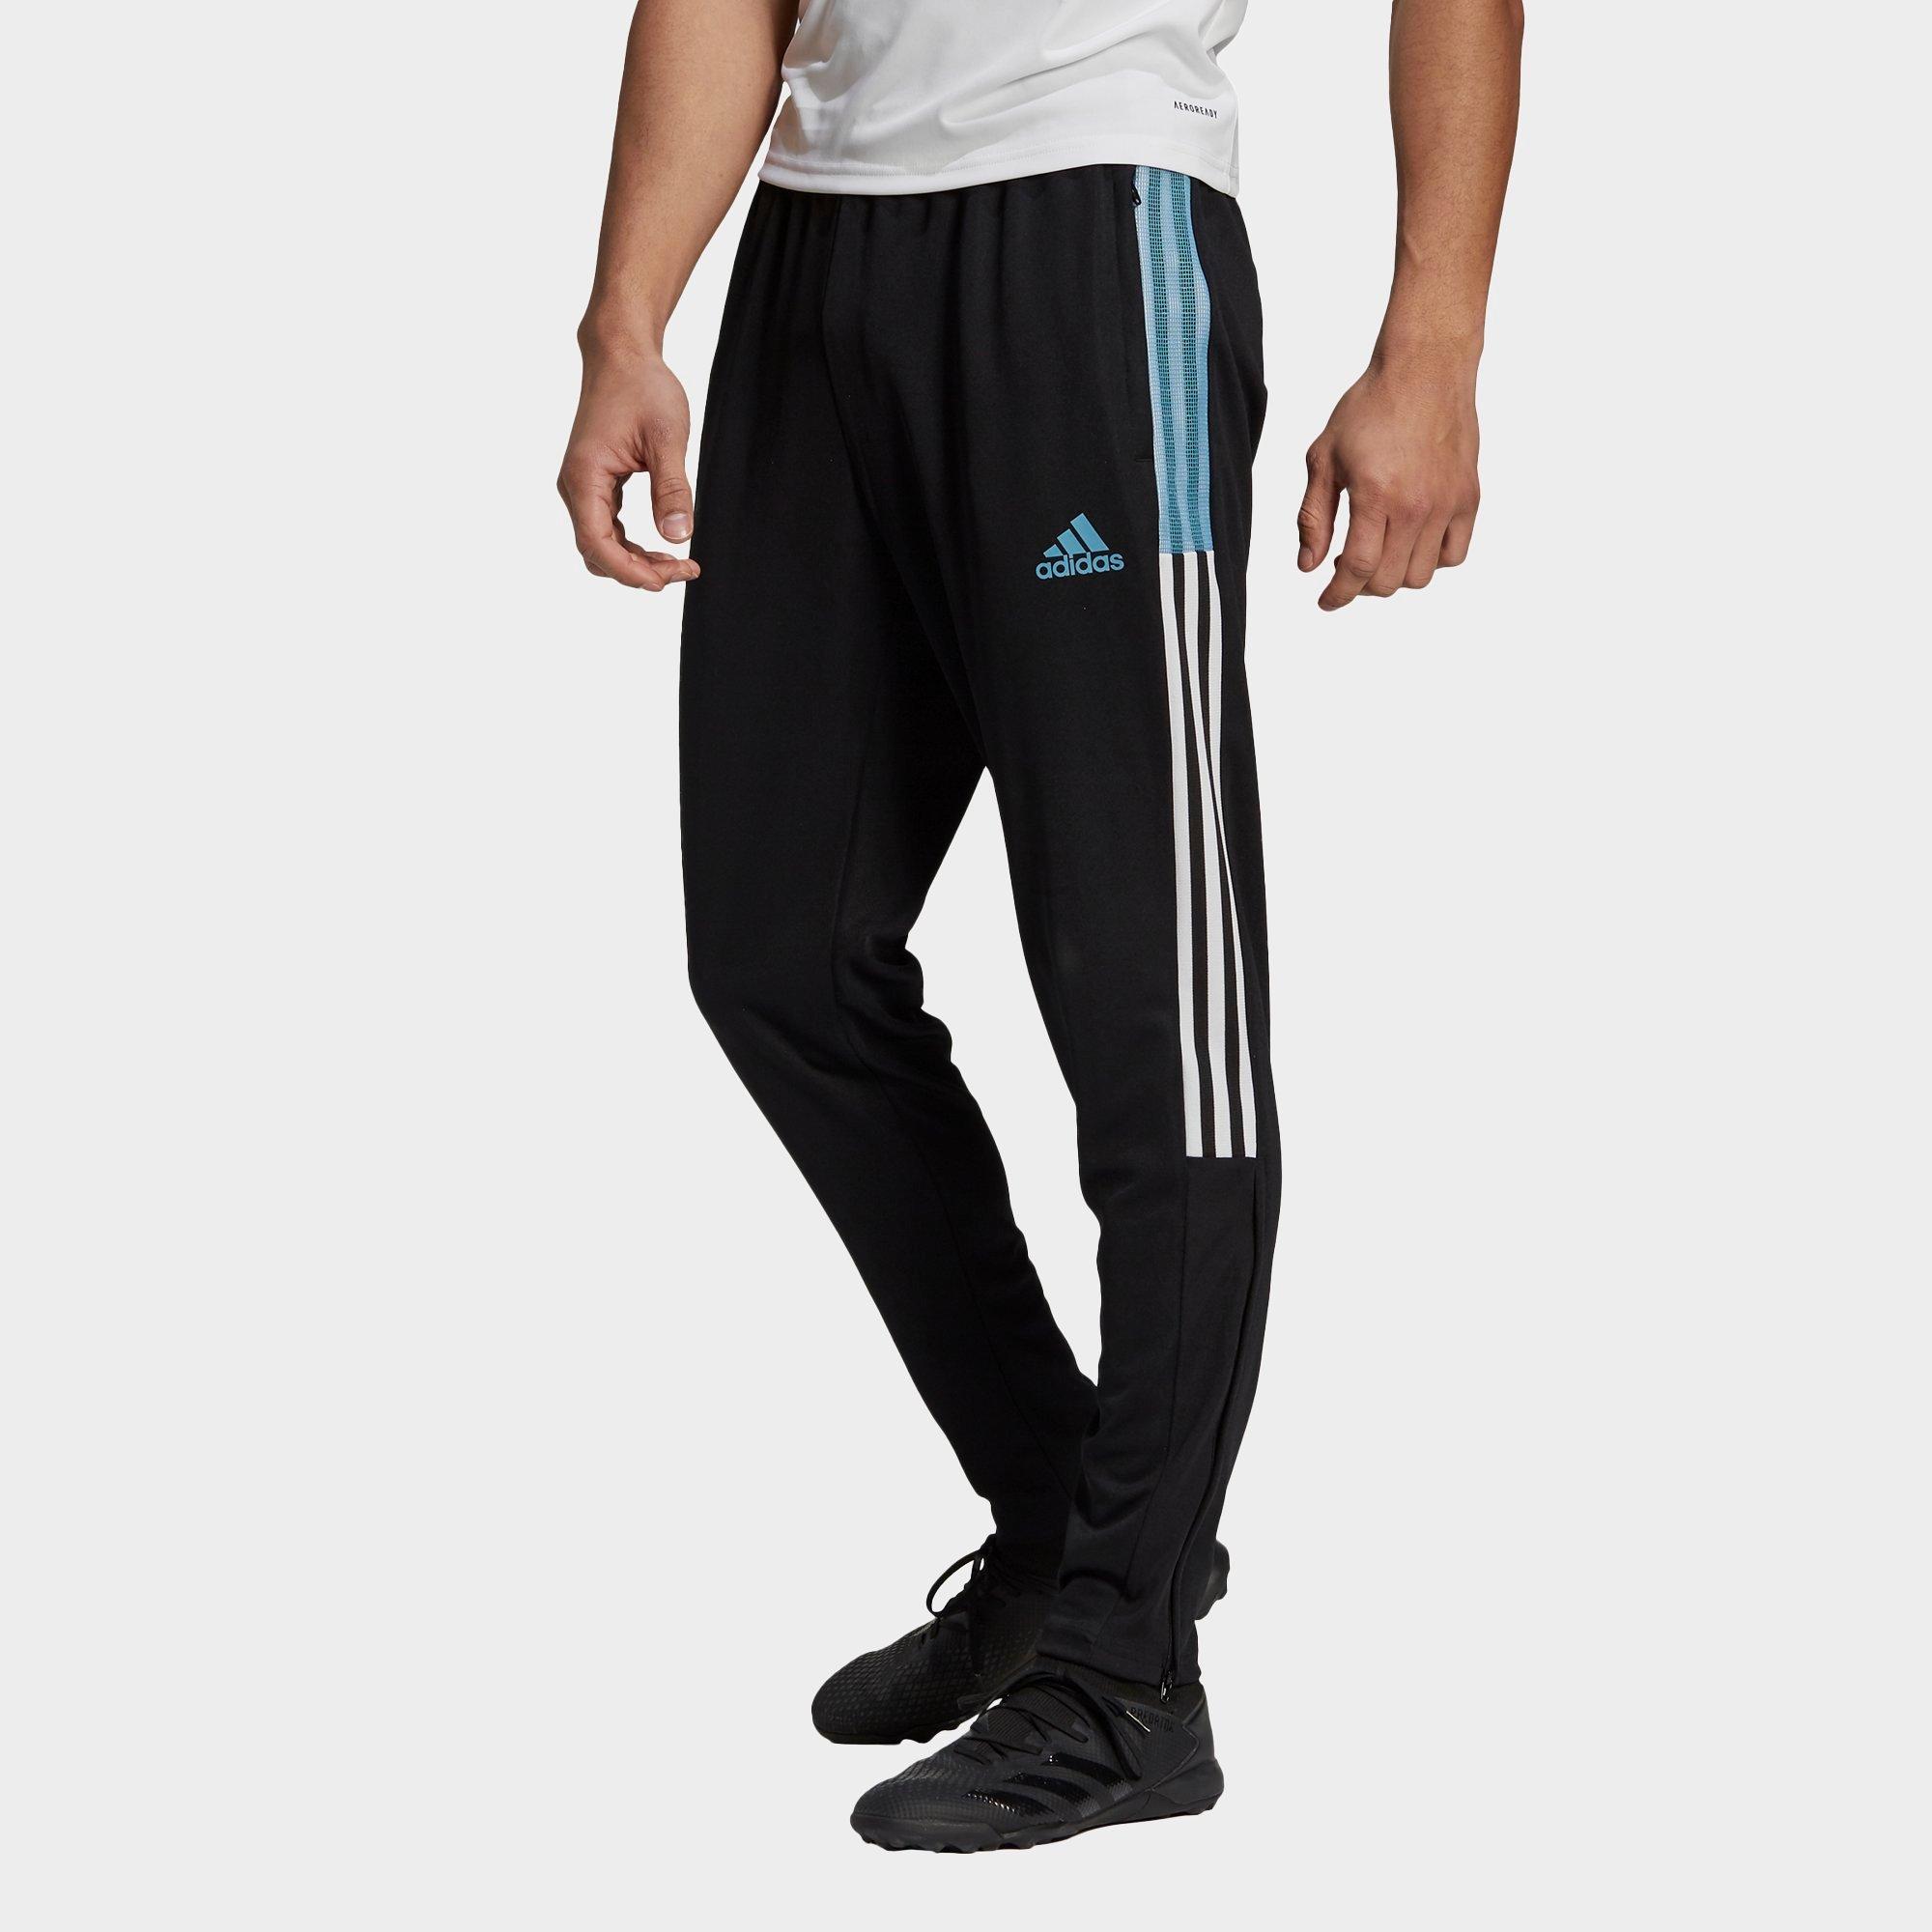 stores that sell adidas clothing